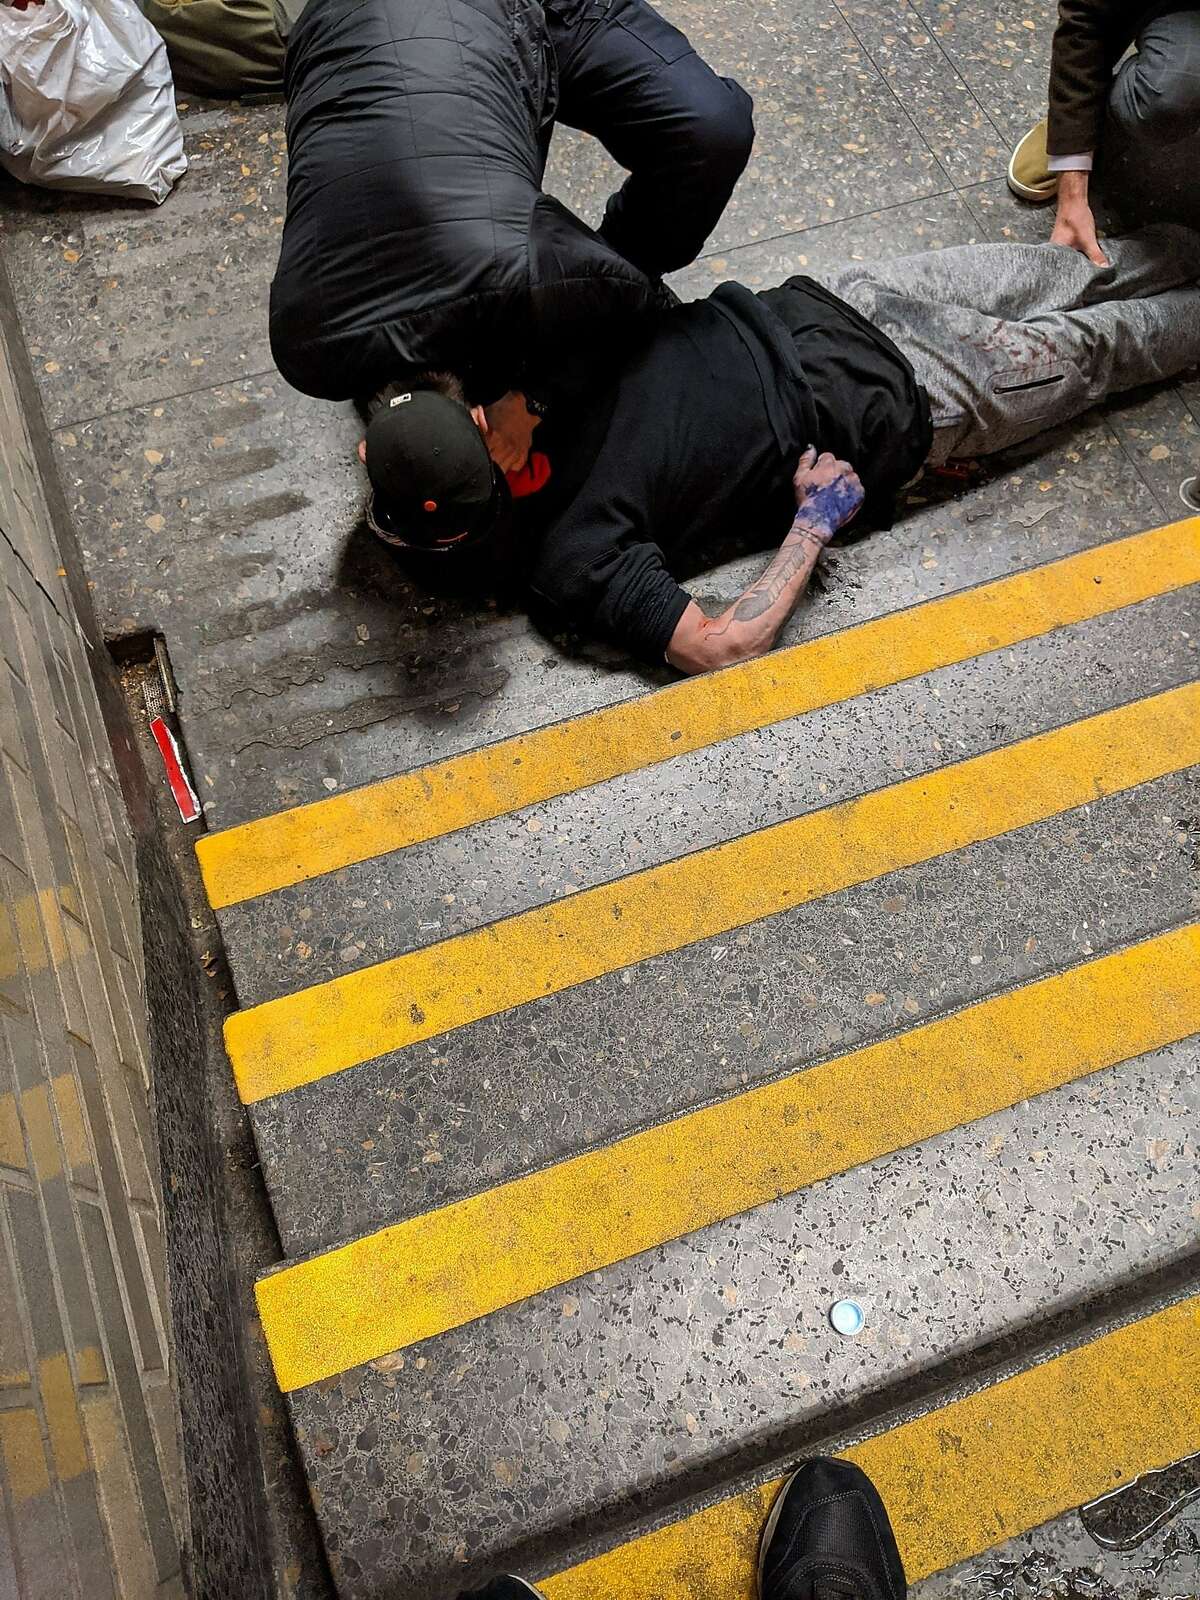 This photo released by BART officials shows Nicholas Stallcup performing CPR on a man who was found overdosing from opioids at BART's Civic Center Station on February 3, 2020. Stallcup had just finished his third week of training to become an emergency medical technician (EMT) at the City College of San Francisco when he encountered the unconscious man.